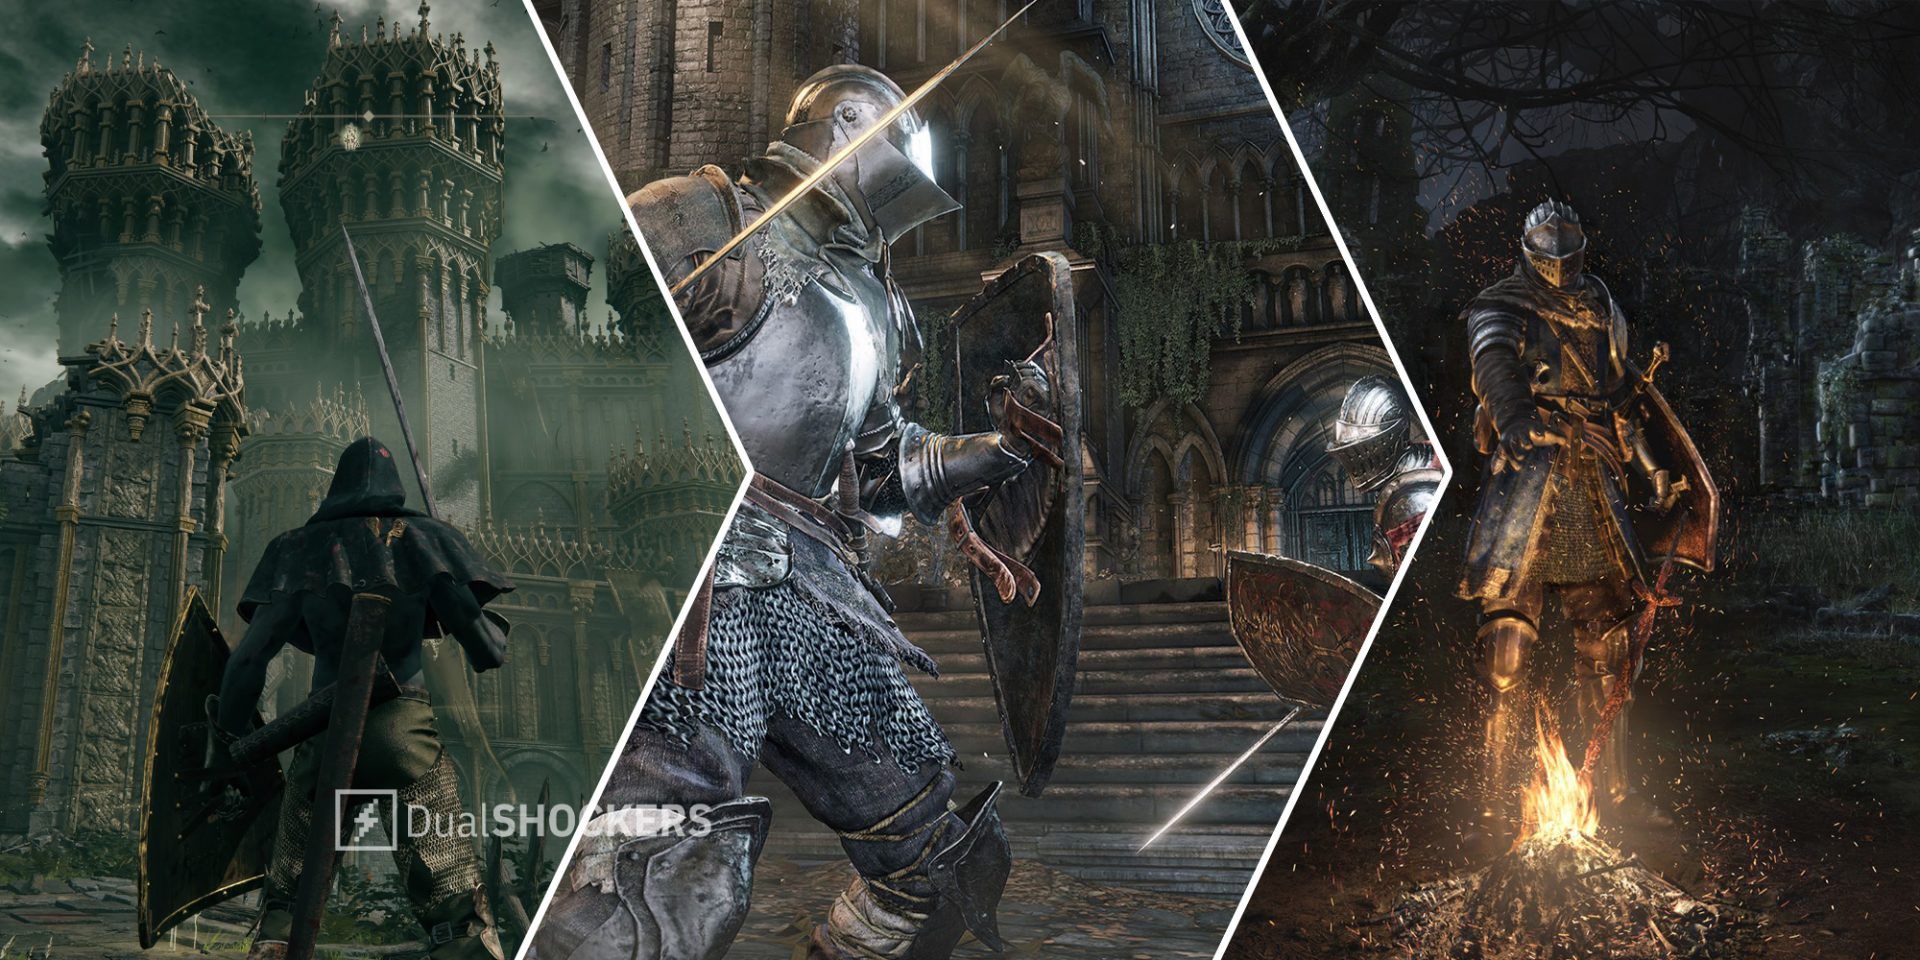 Elden Ring player looking at a castle while holding a sword and shield on left, Dark Souls player holding a sword and shield in a battle in middle, Dark Souls player by a bonfire on right